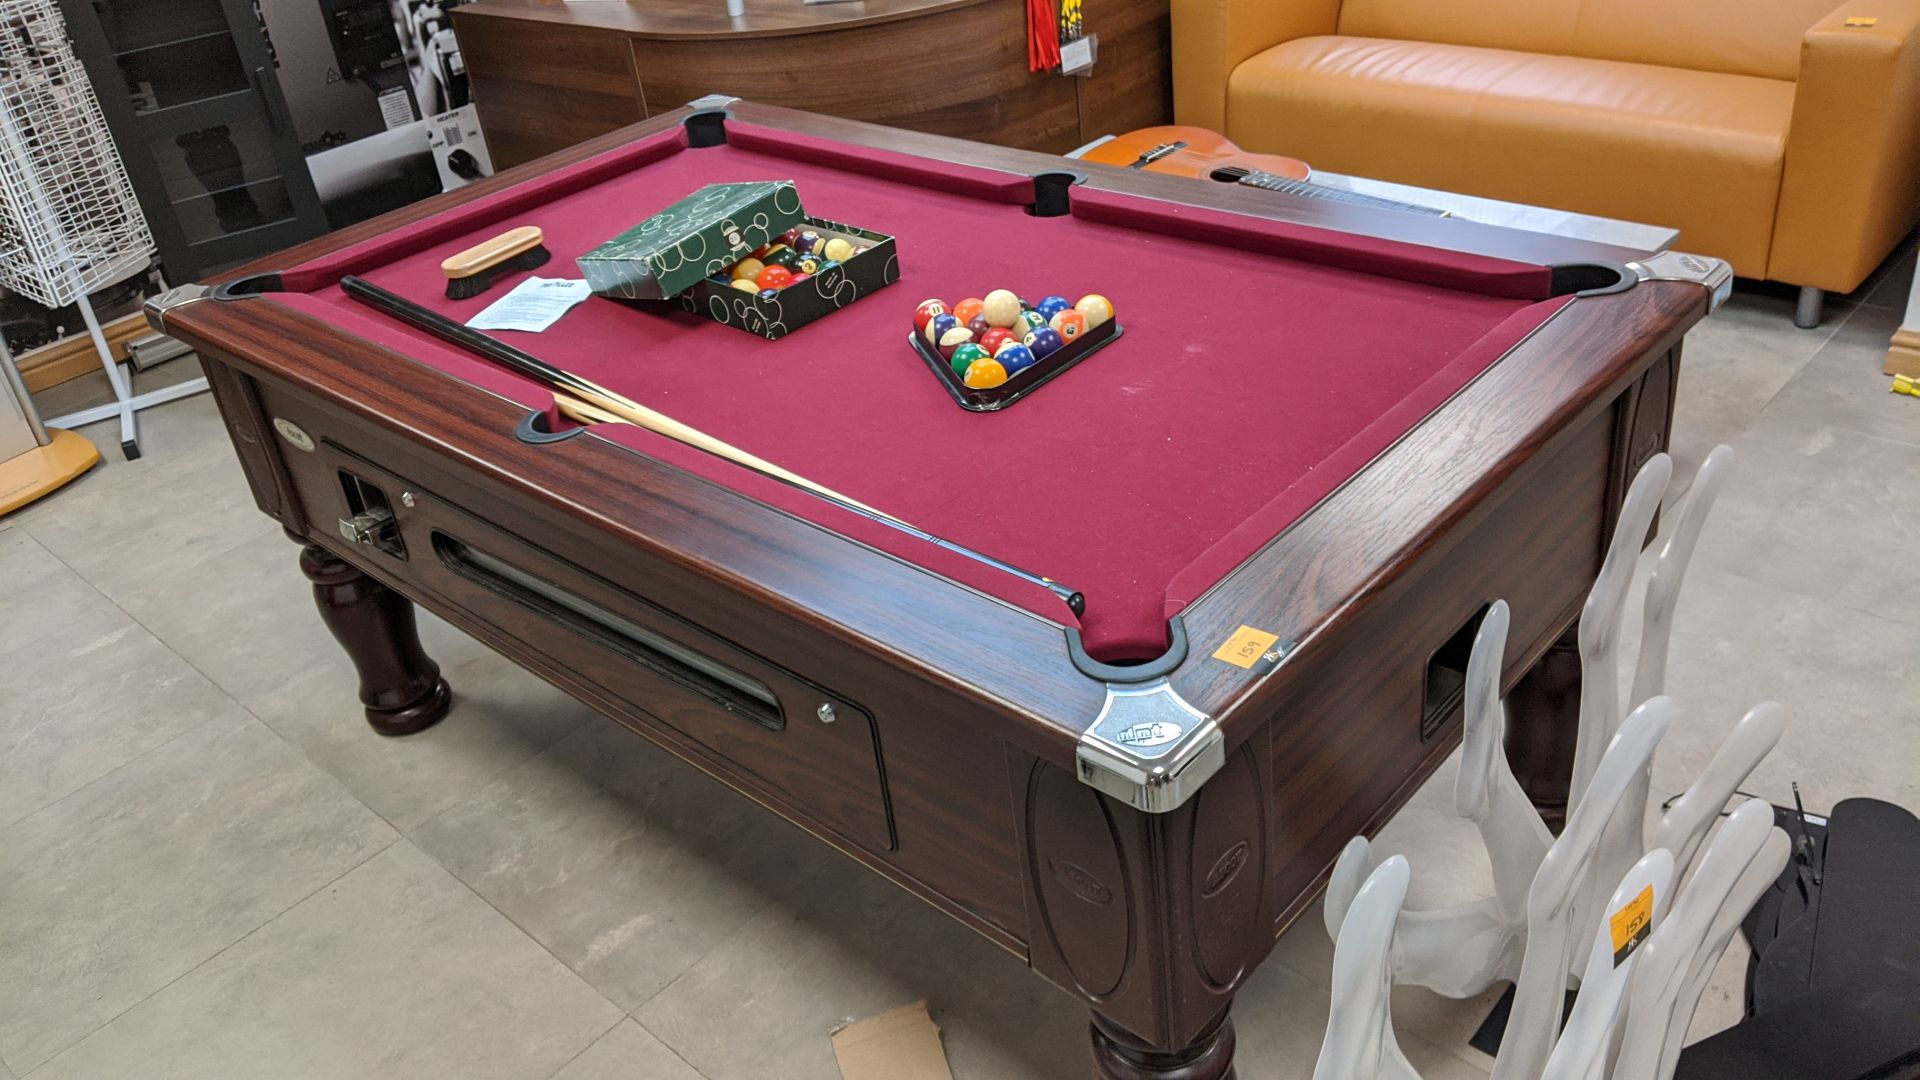 DPT Ascot pool table with red/burgundy baize, including 2 off cues, triangle and full set of